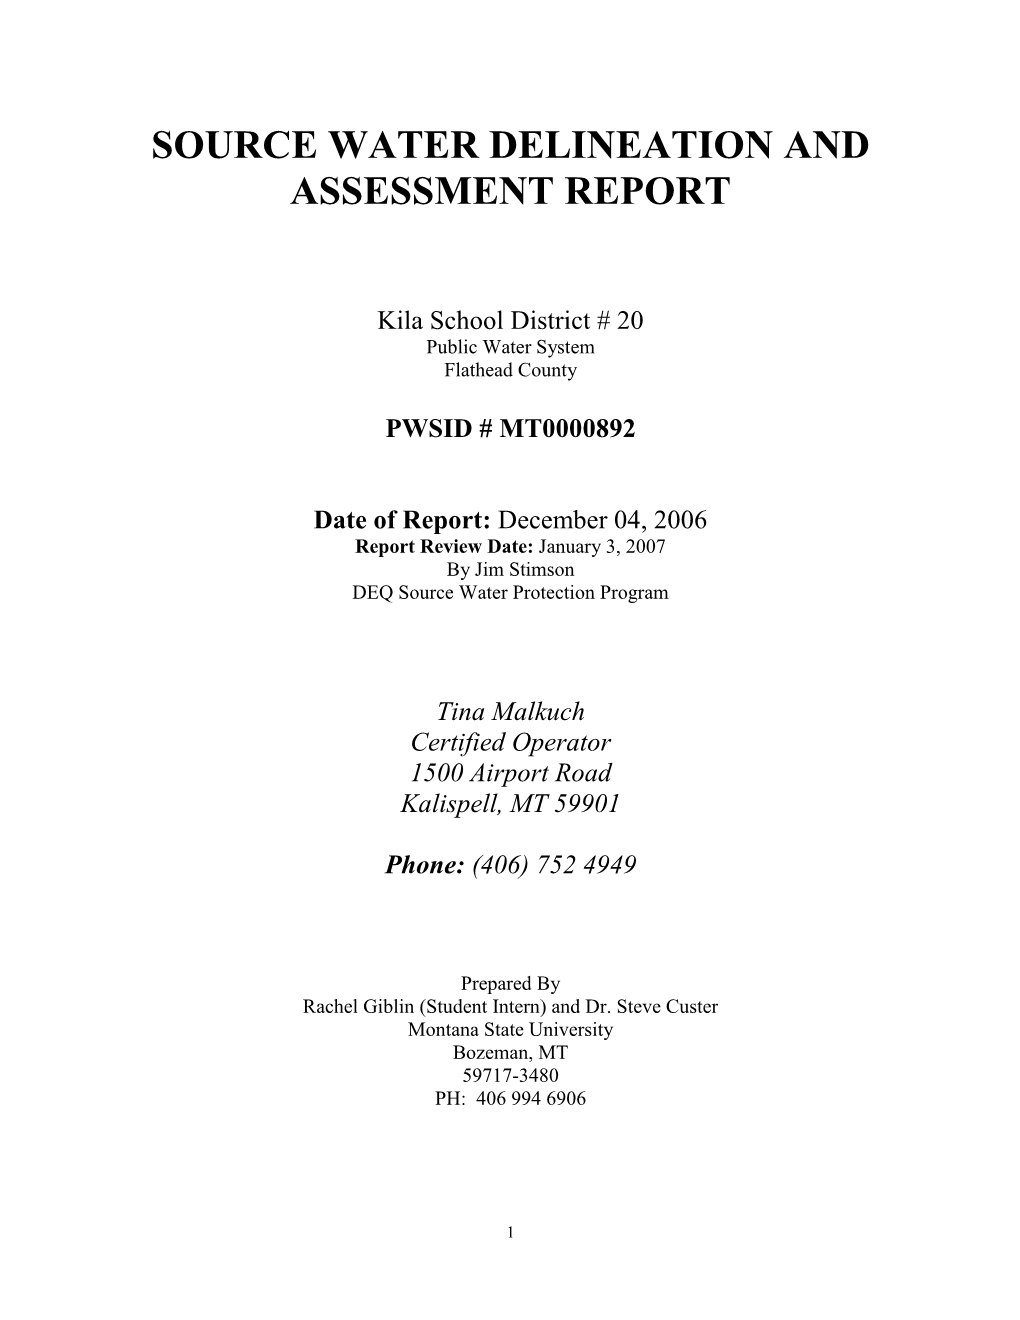 Source Water Delineation and Assessment Report